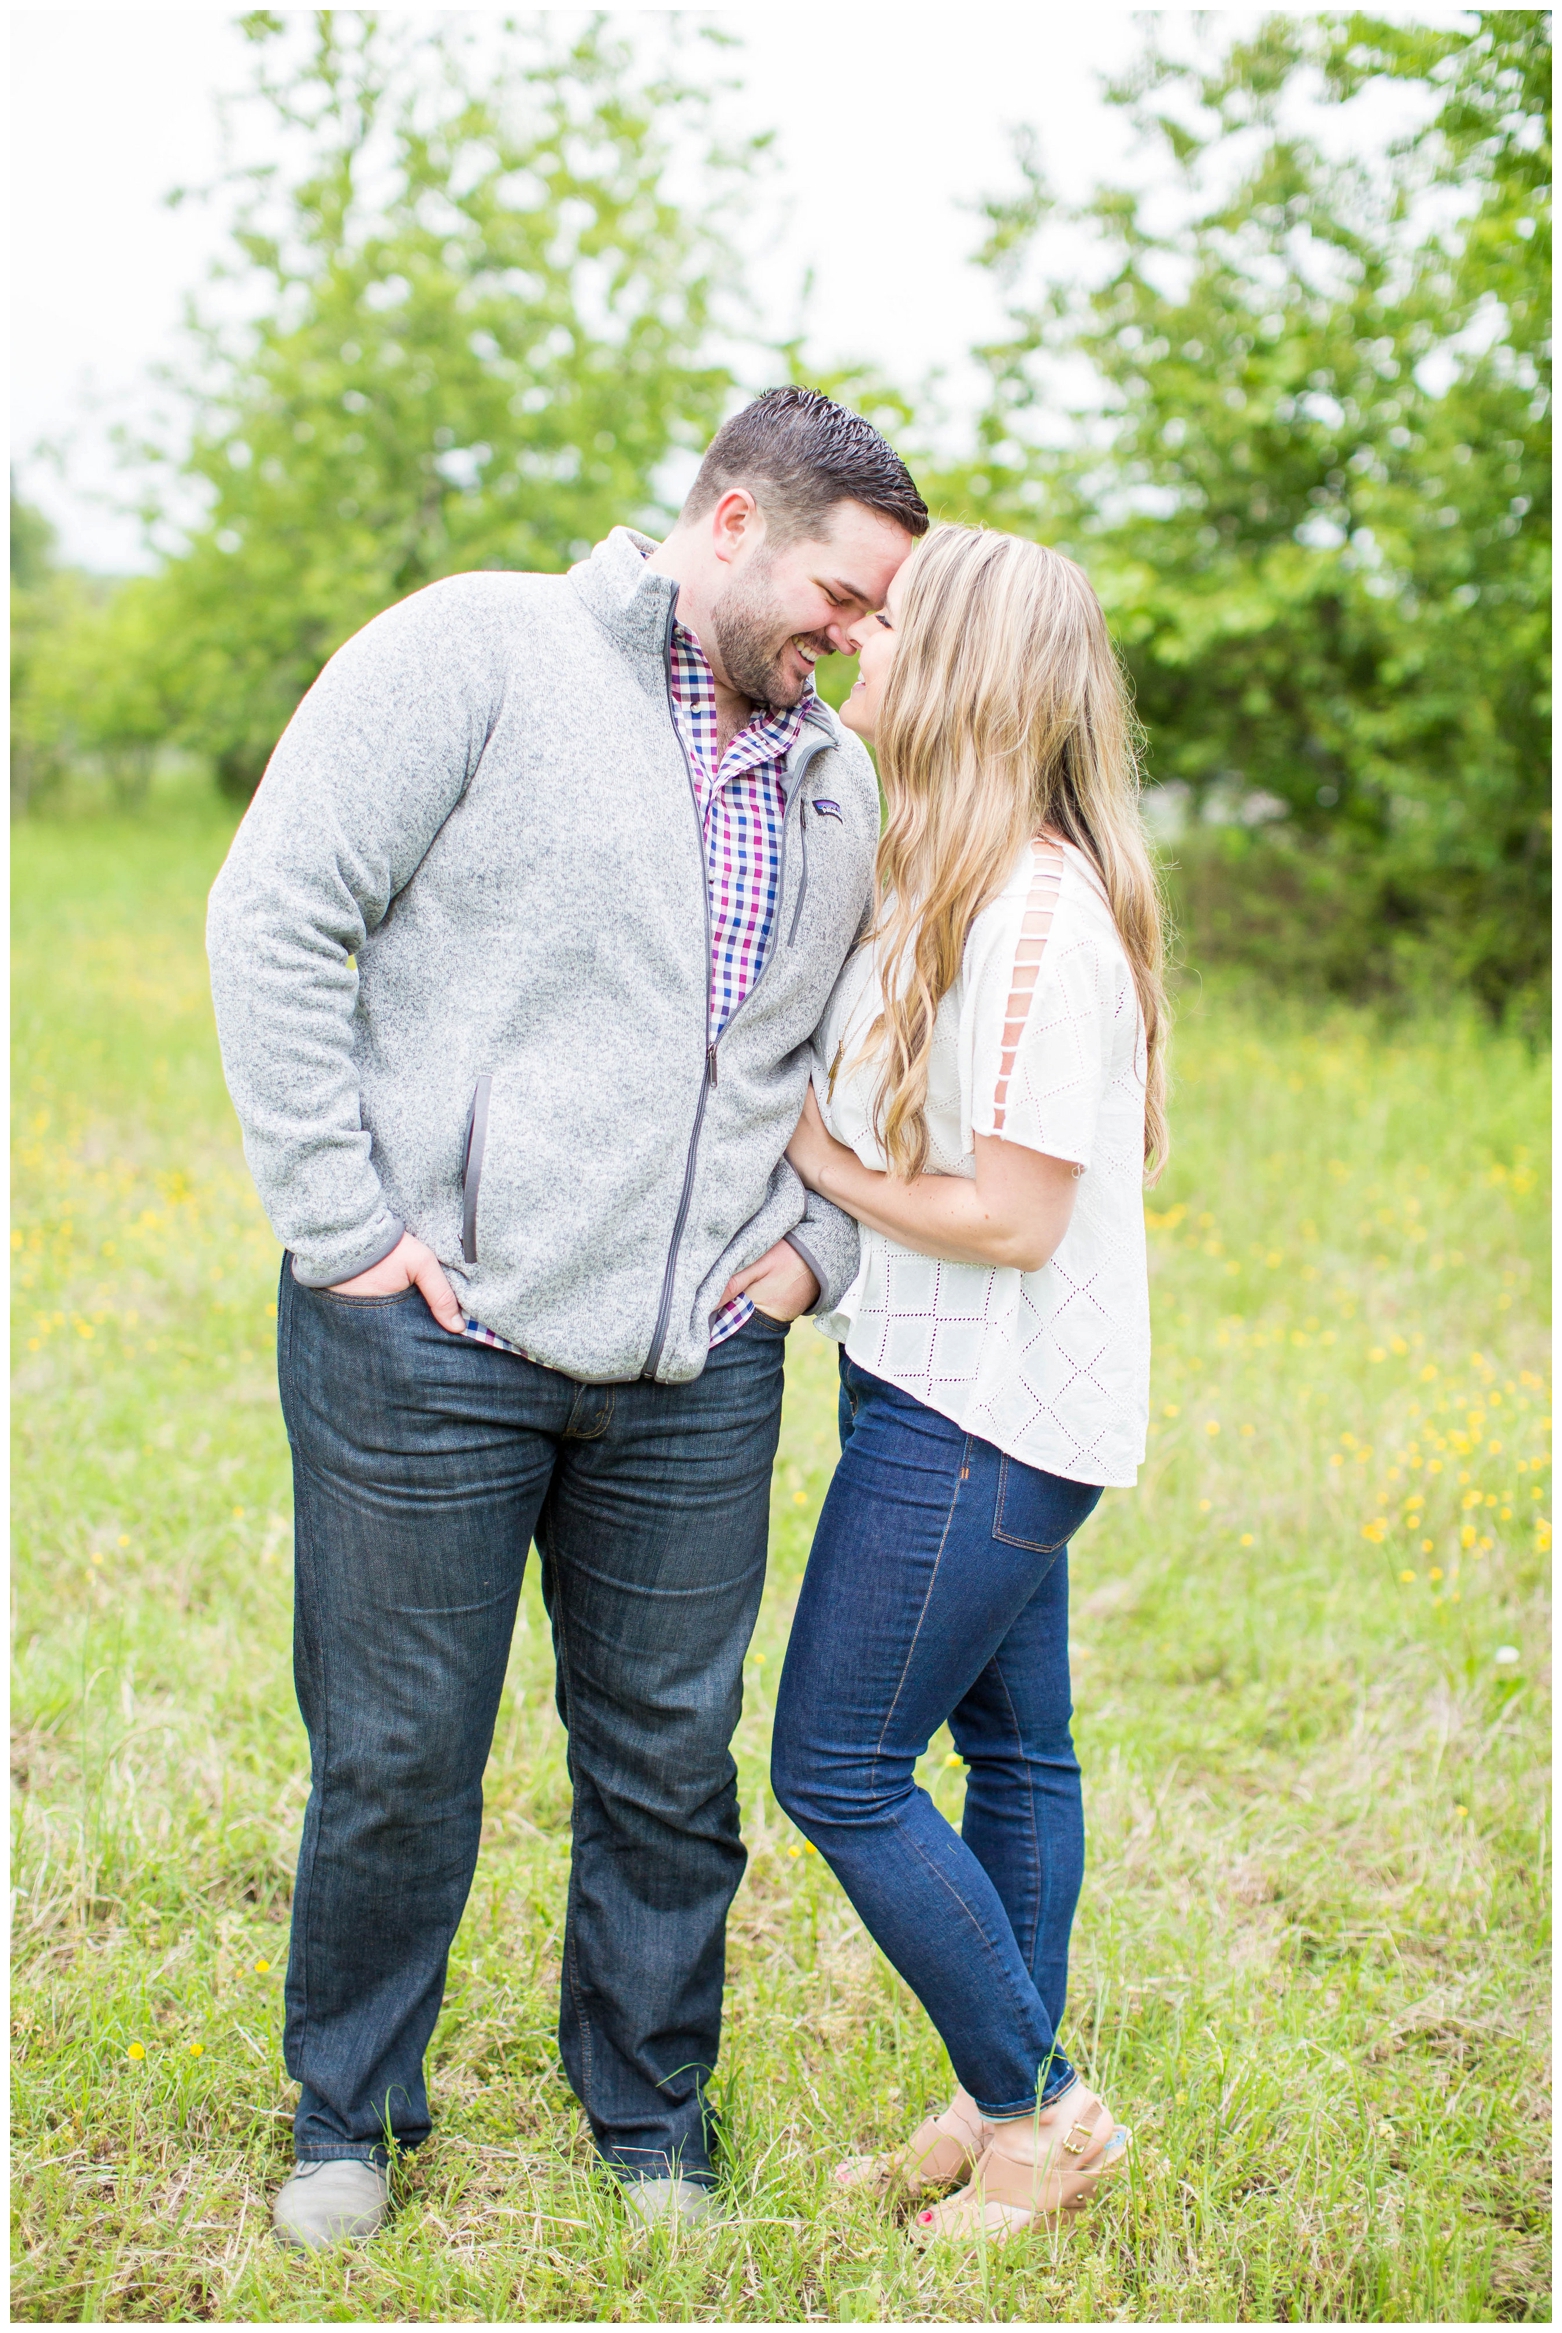 View More: http://hopetaylorphotographyphotos.pass.us/lynsay-and-brian-engagement